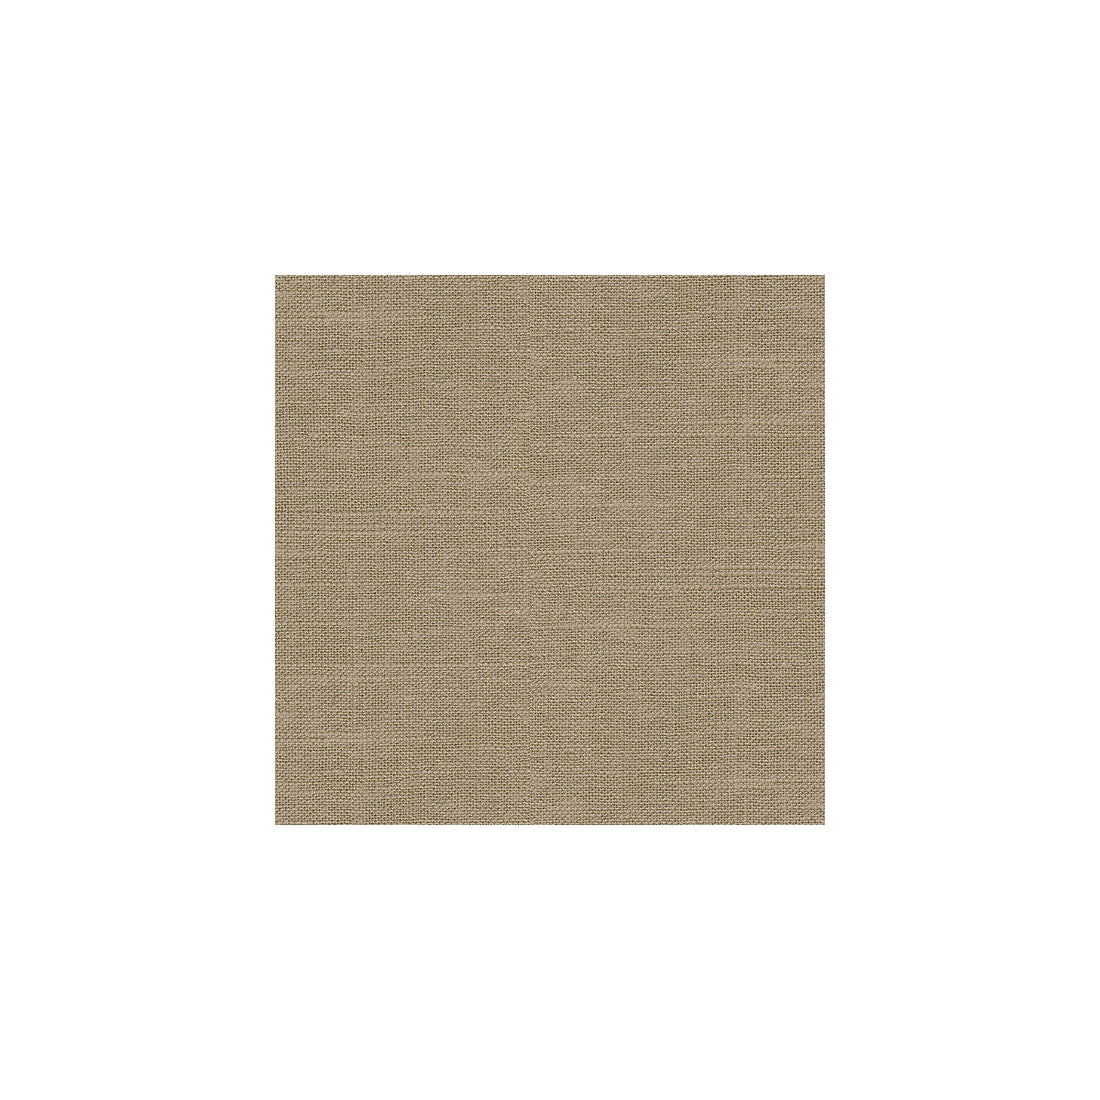 Barnegat fabric in stone color - pattern 24573.161.0 - by Kravet Basics in the Perfect Plains collection